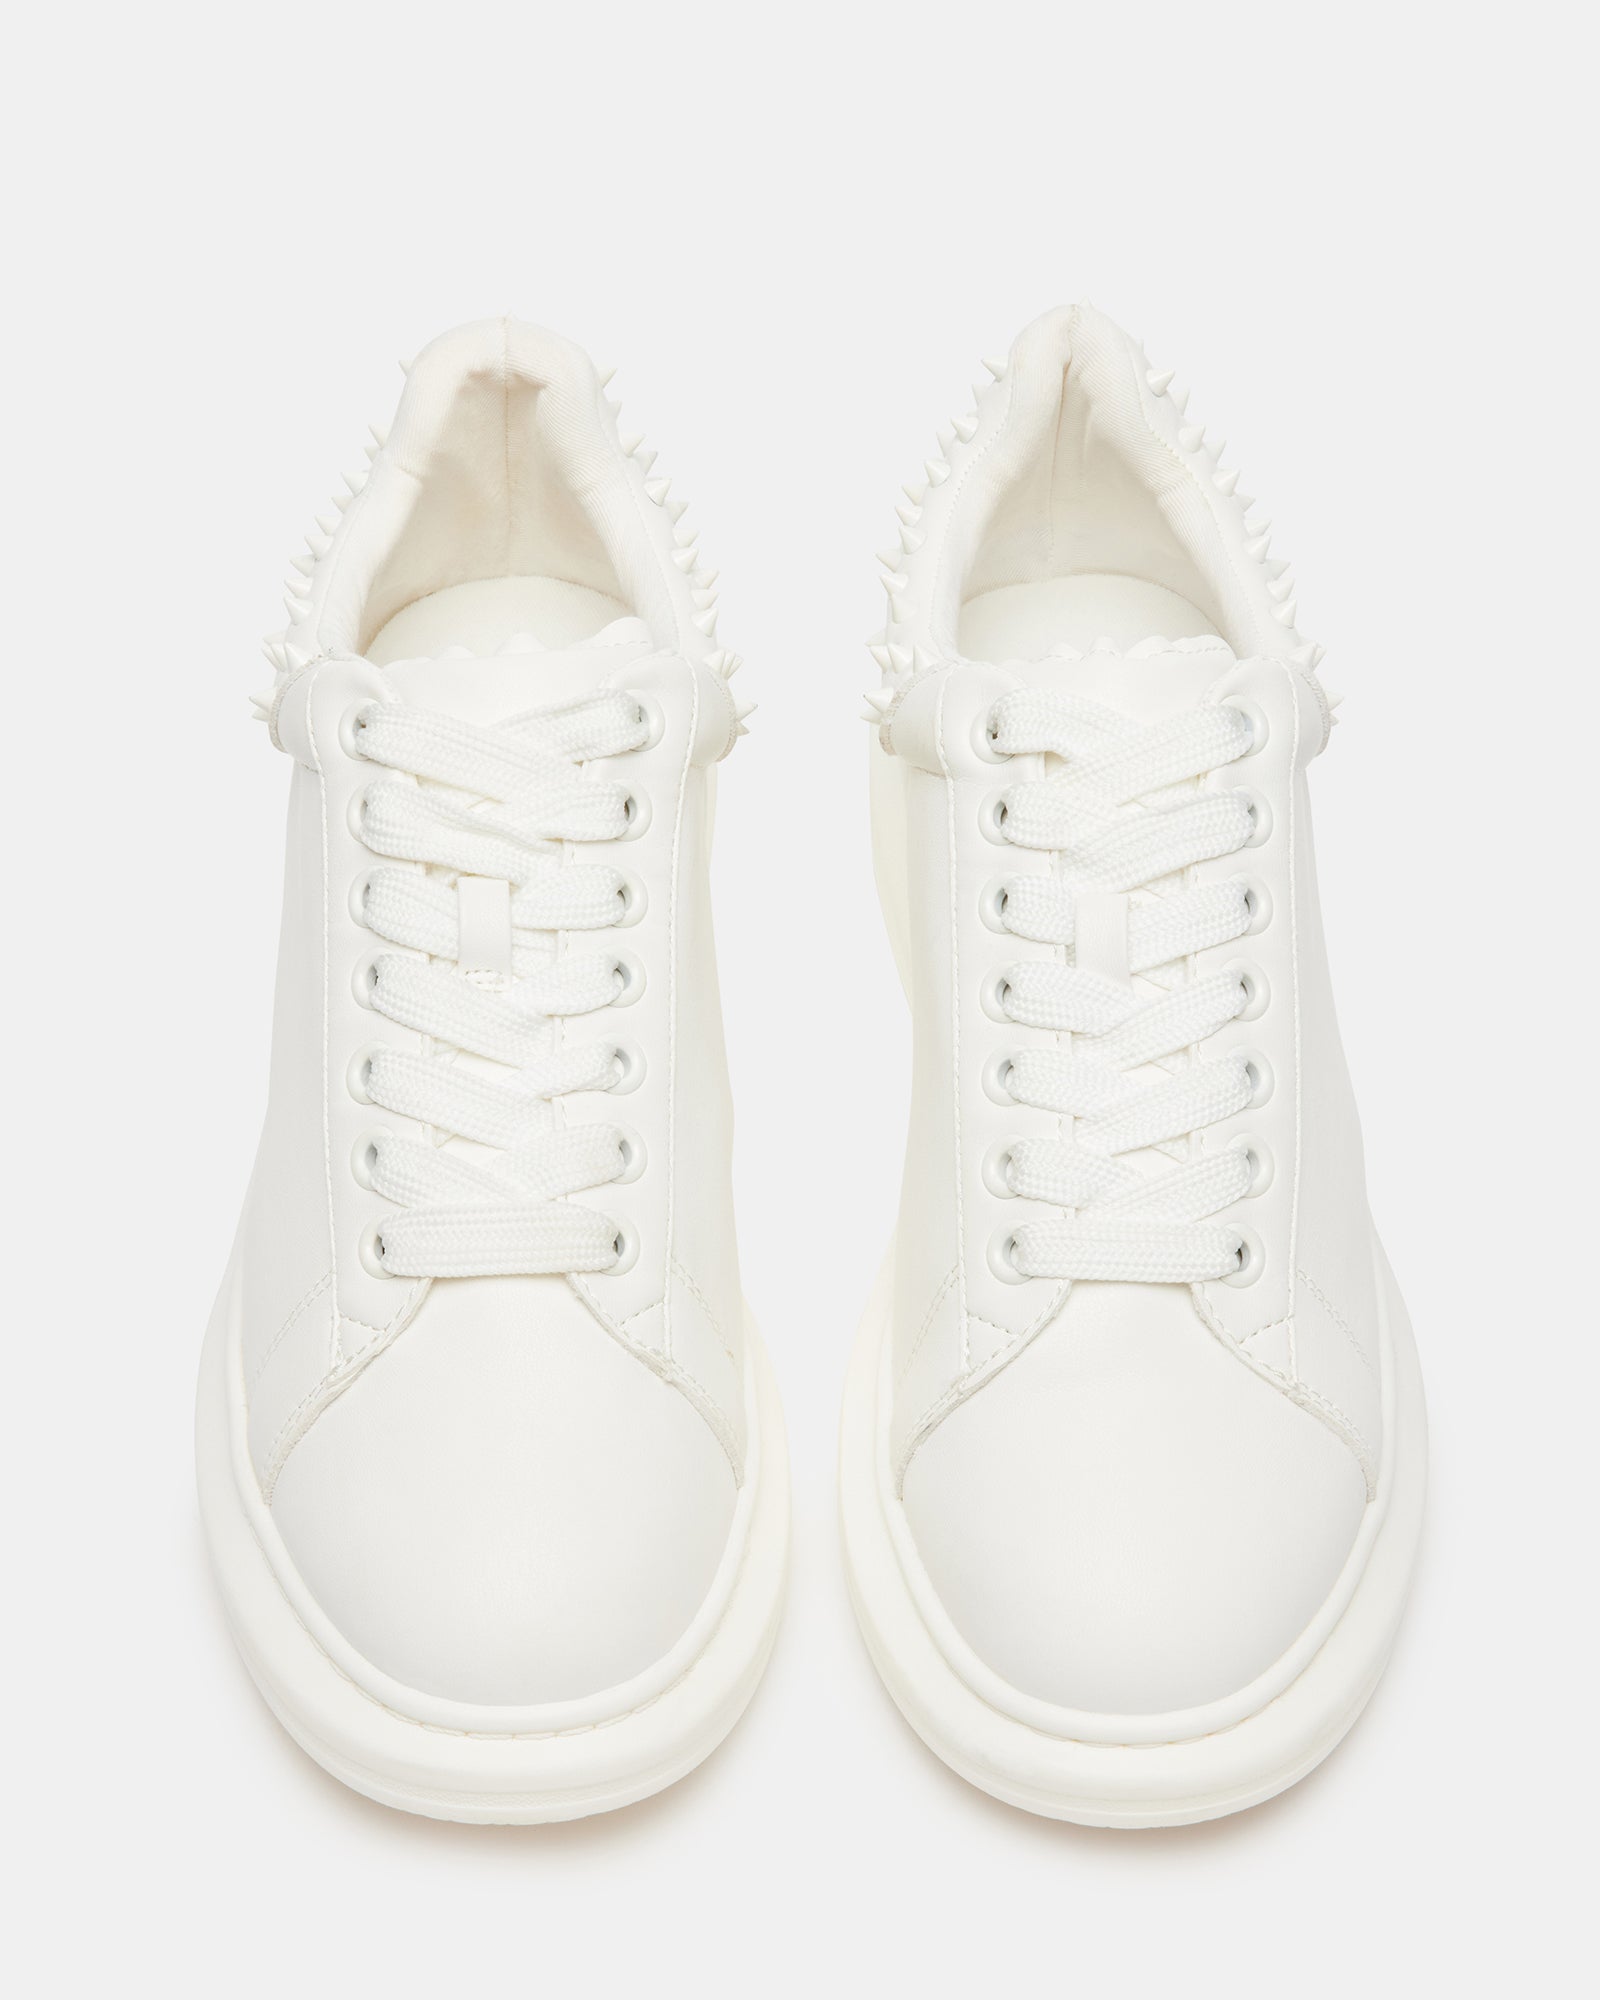 FROSTING White Low Top Lace Up Sneaker | Men's Sneakers – Steve Madden